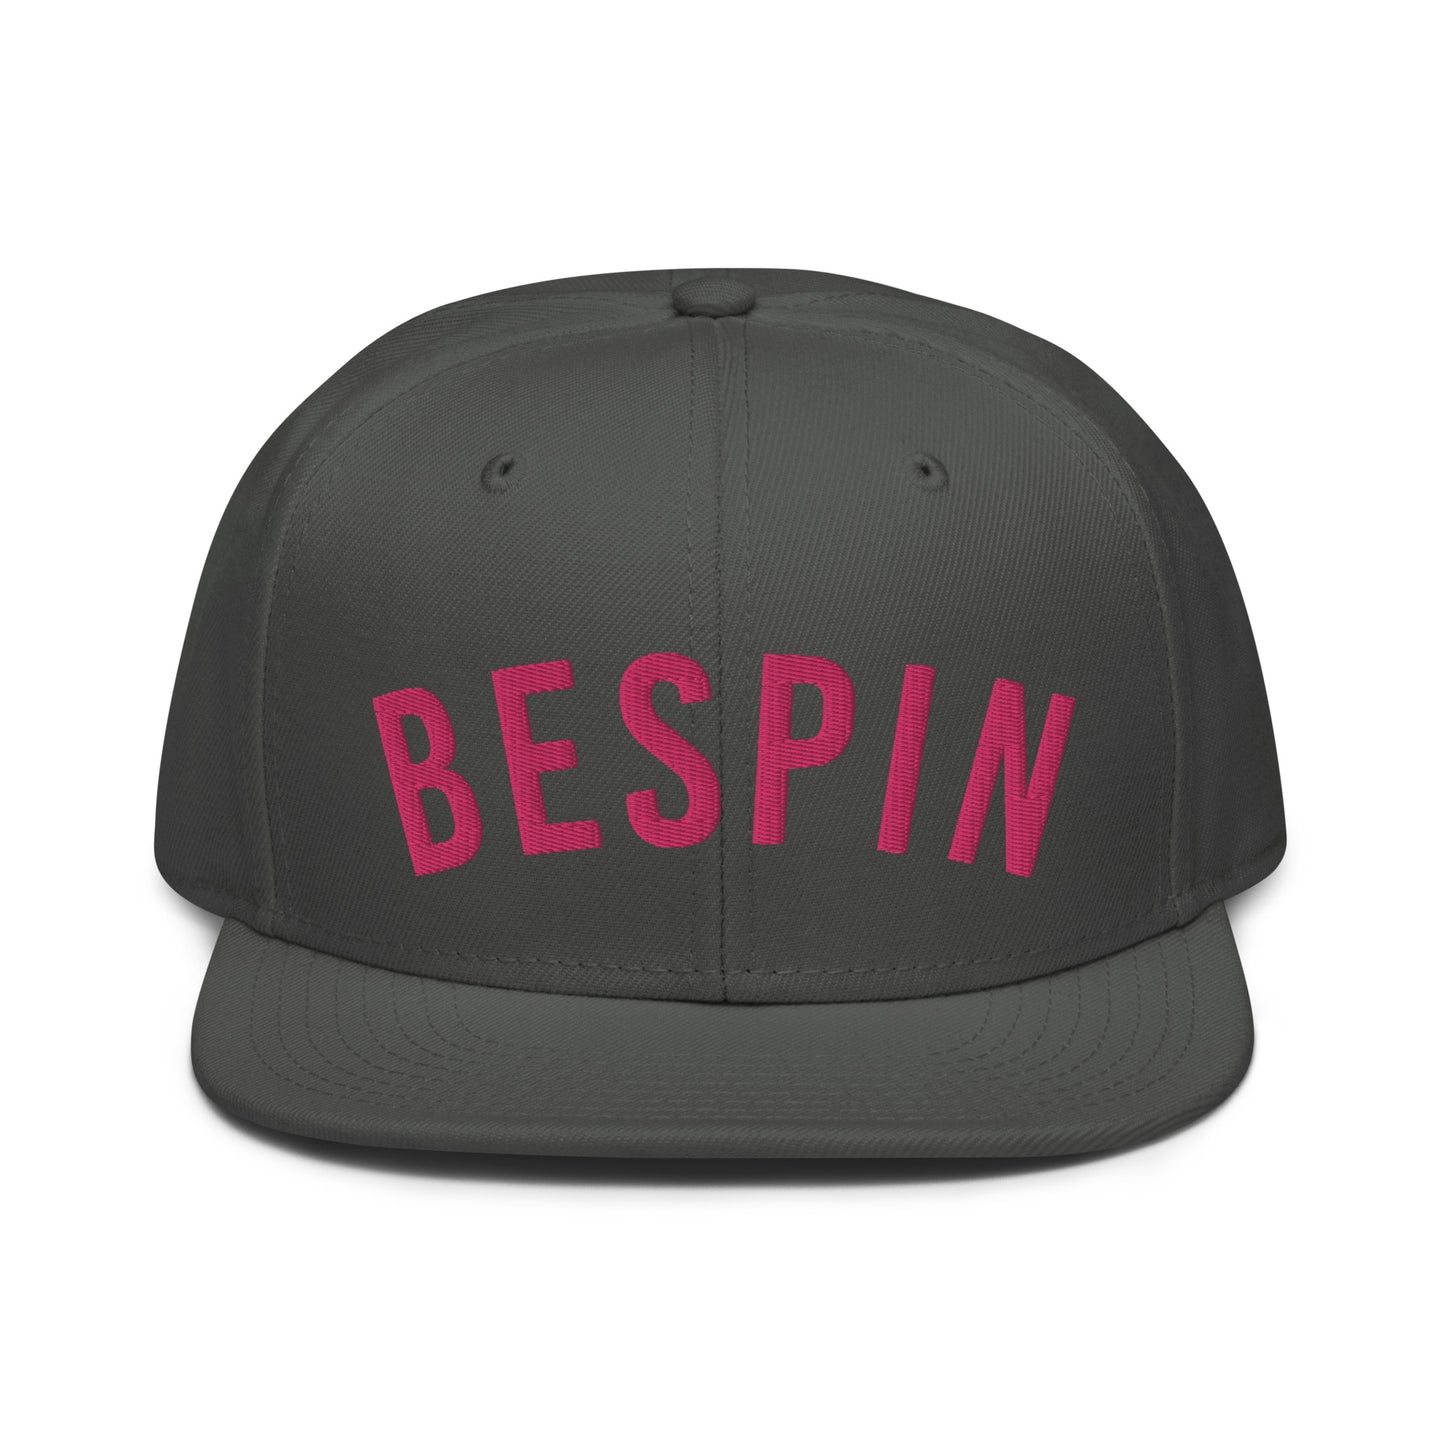 Bespin Home Team snapback hat